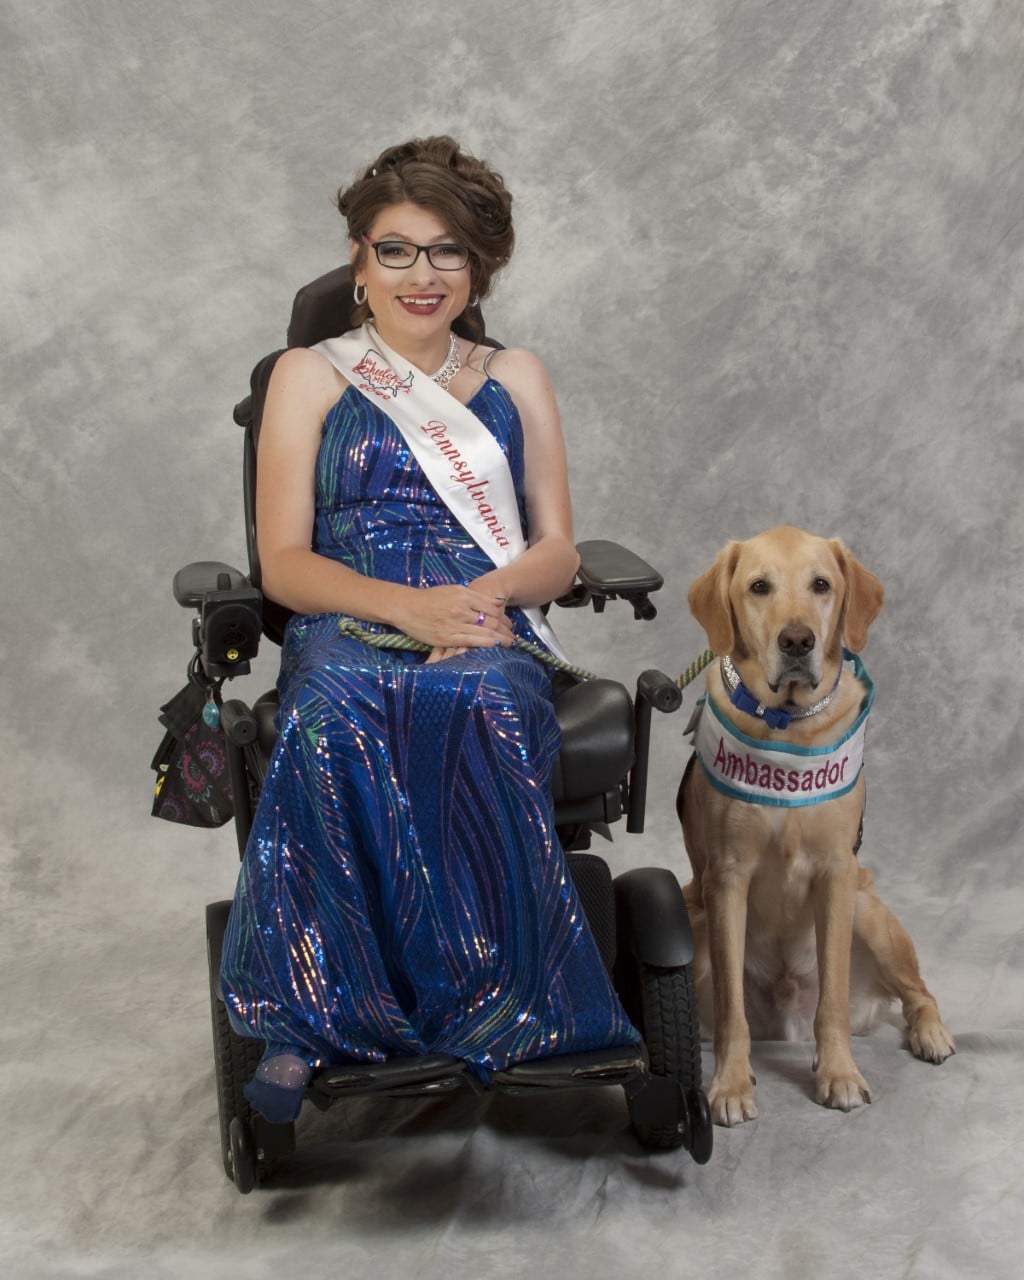 young woman in an evening dress seating in a wheelchair with her service dog seating next to her